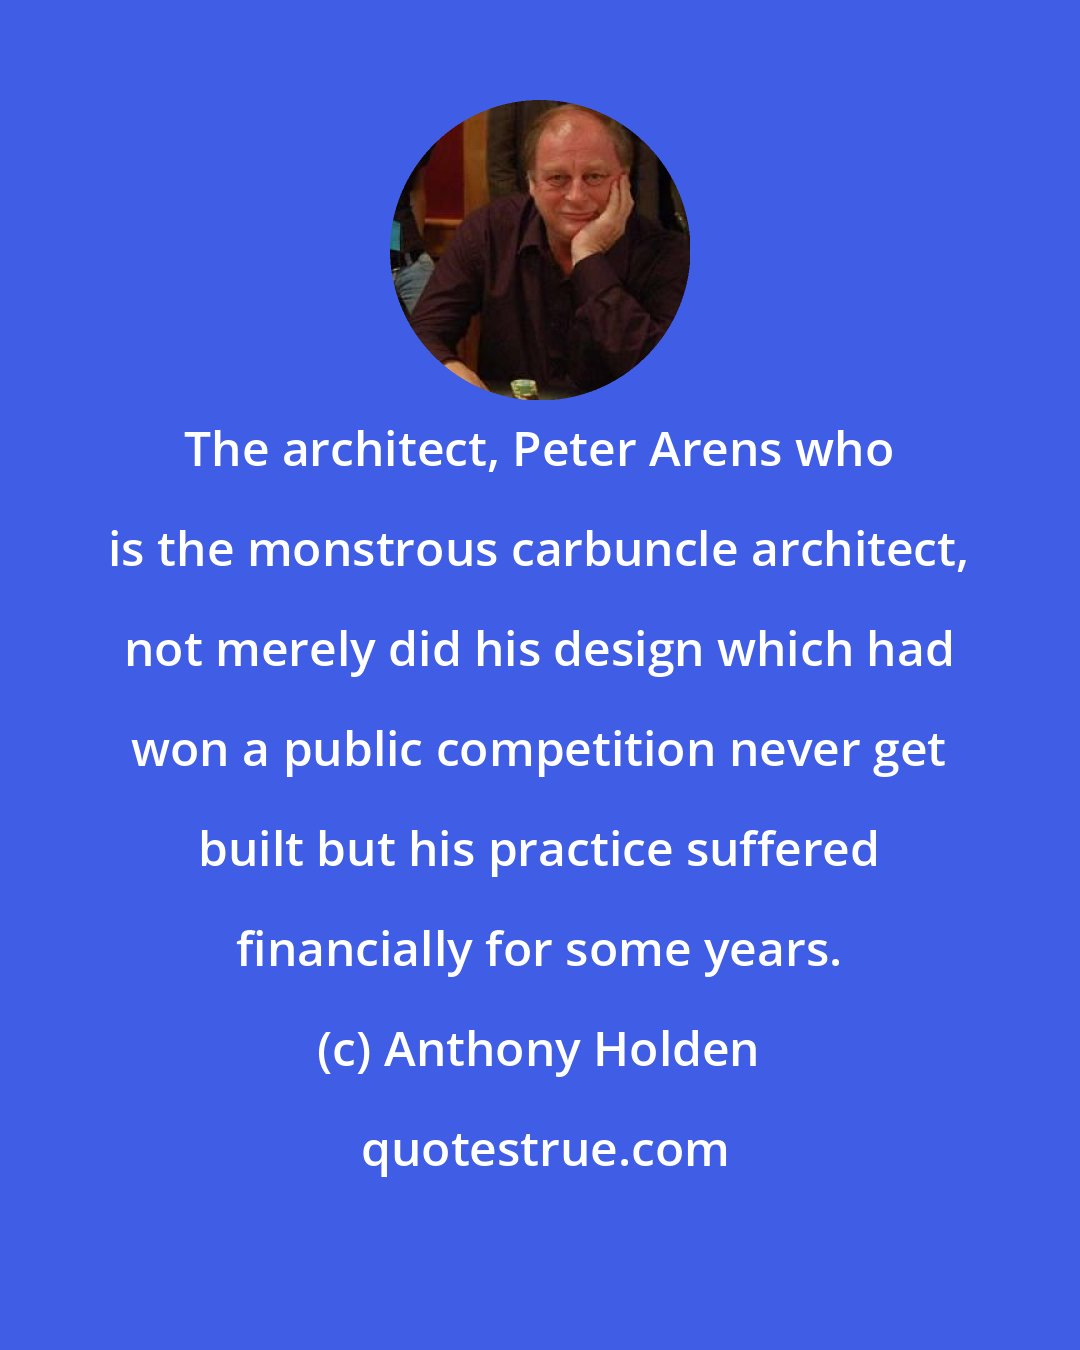 Anthony Holden: The architect, Peter Arens who is the monstrous carbuncle architect, not merely did his design which had won a public competition never get built but his practice suffered financially for some years.